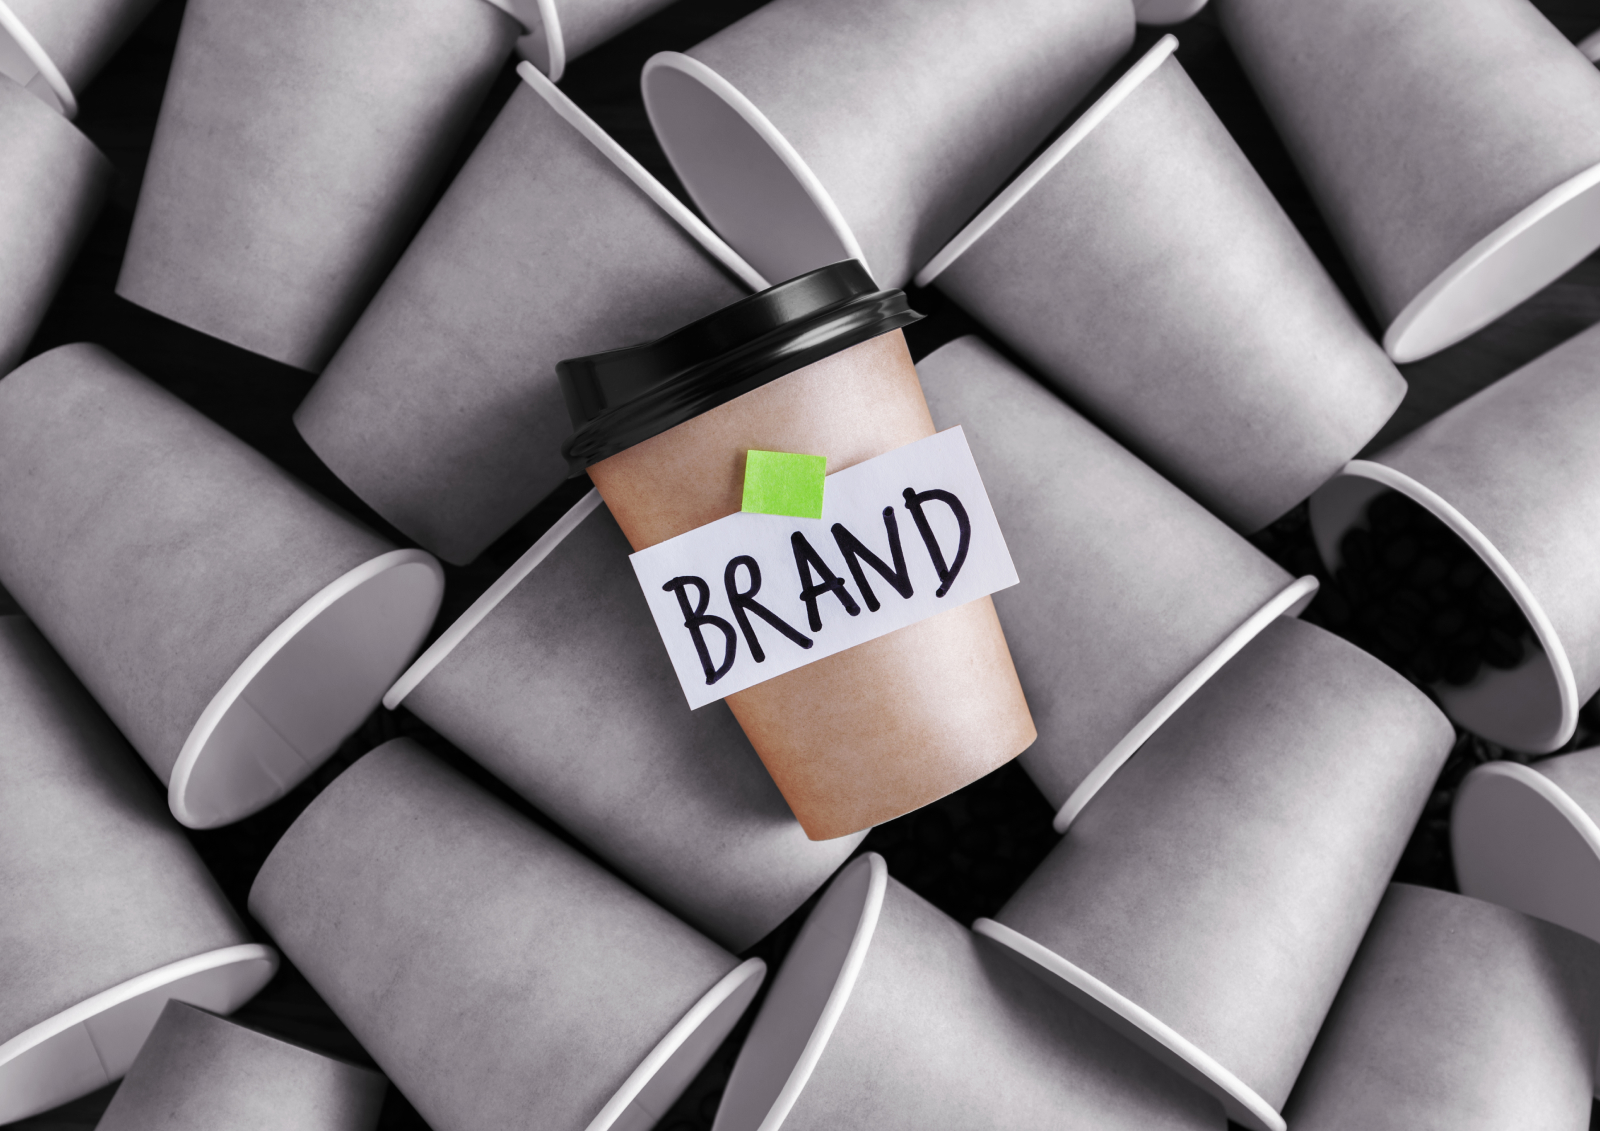 Beyond the Shelf: Package Design and Brand Identity in India